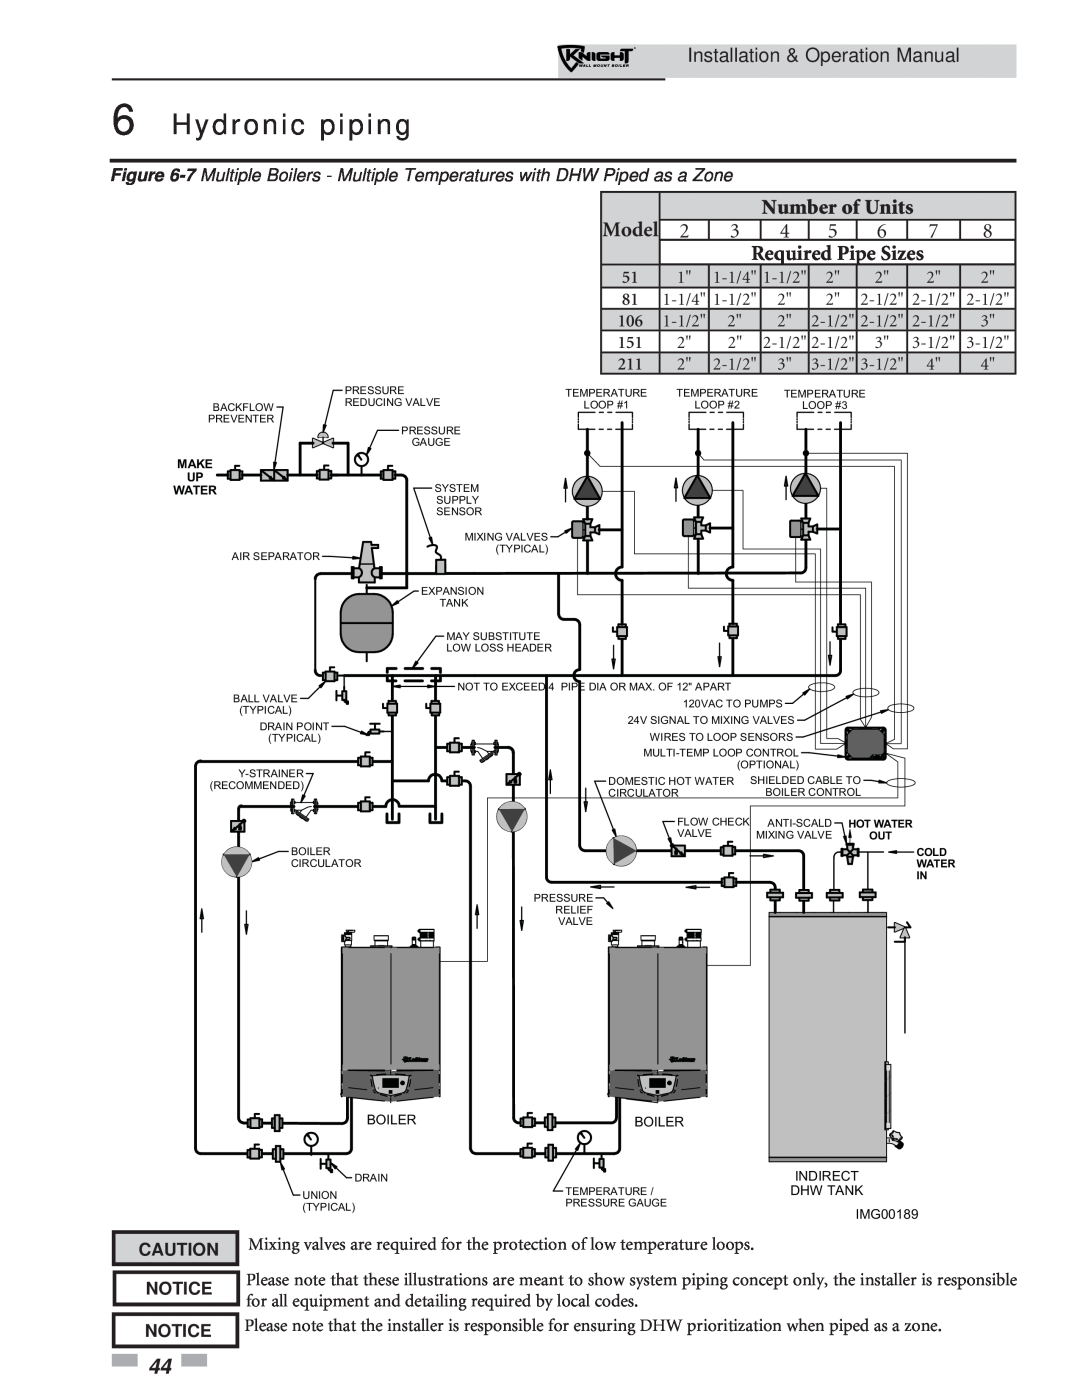 Lochinvar 51-211 operation manual Model, Hydronic piping, Number of Units, Required Pipe Sizes 